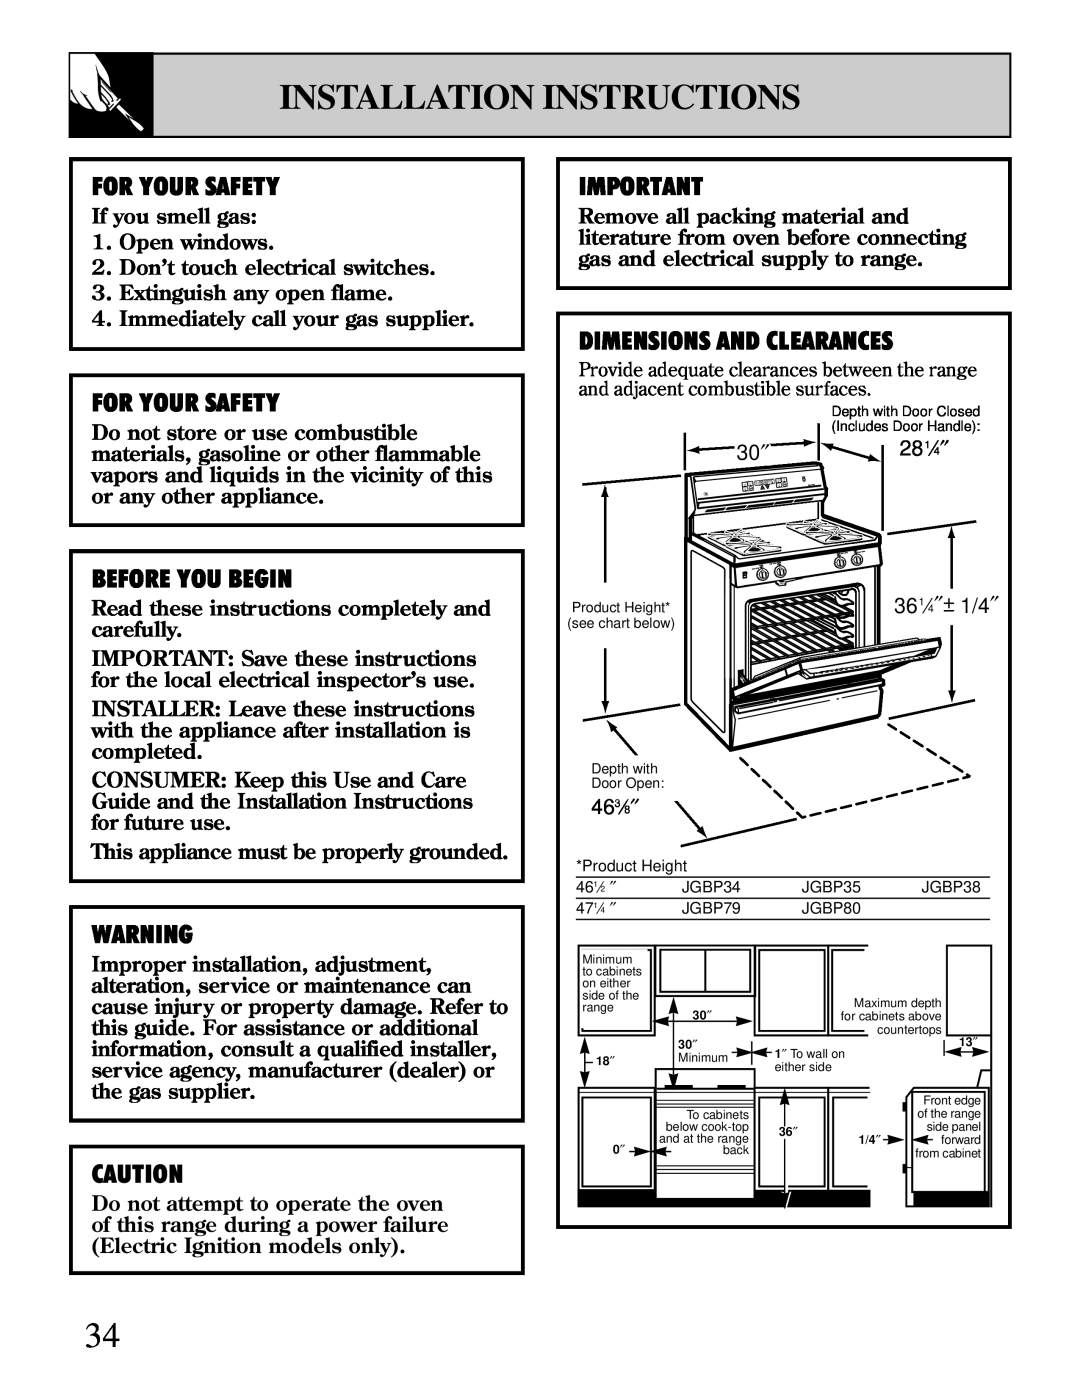 GE JGBP38 installation instructions Installation Instructions, For Your Safety, Dimensions And Clearances, Before You Begin 